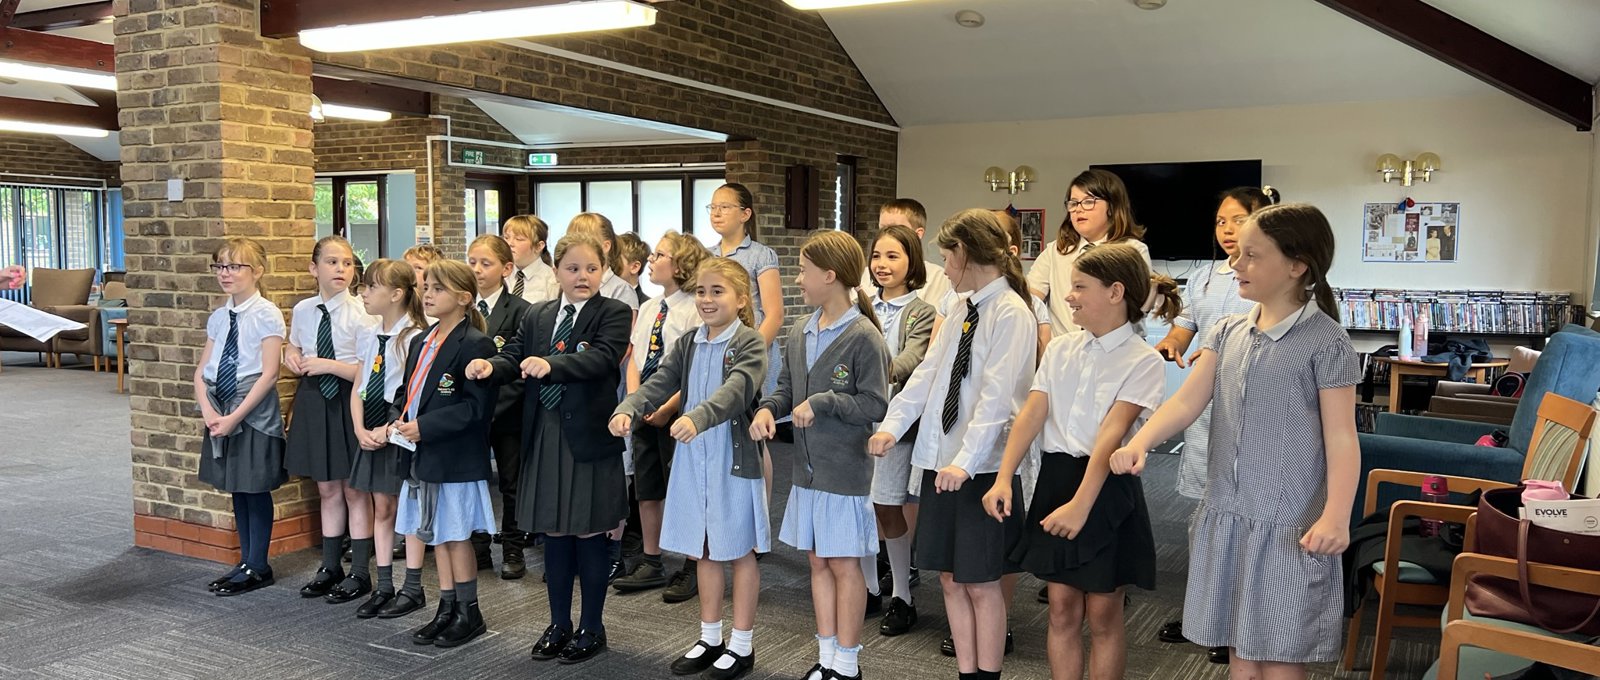 School choir performing for Warwick Court, Daventry customers 19